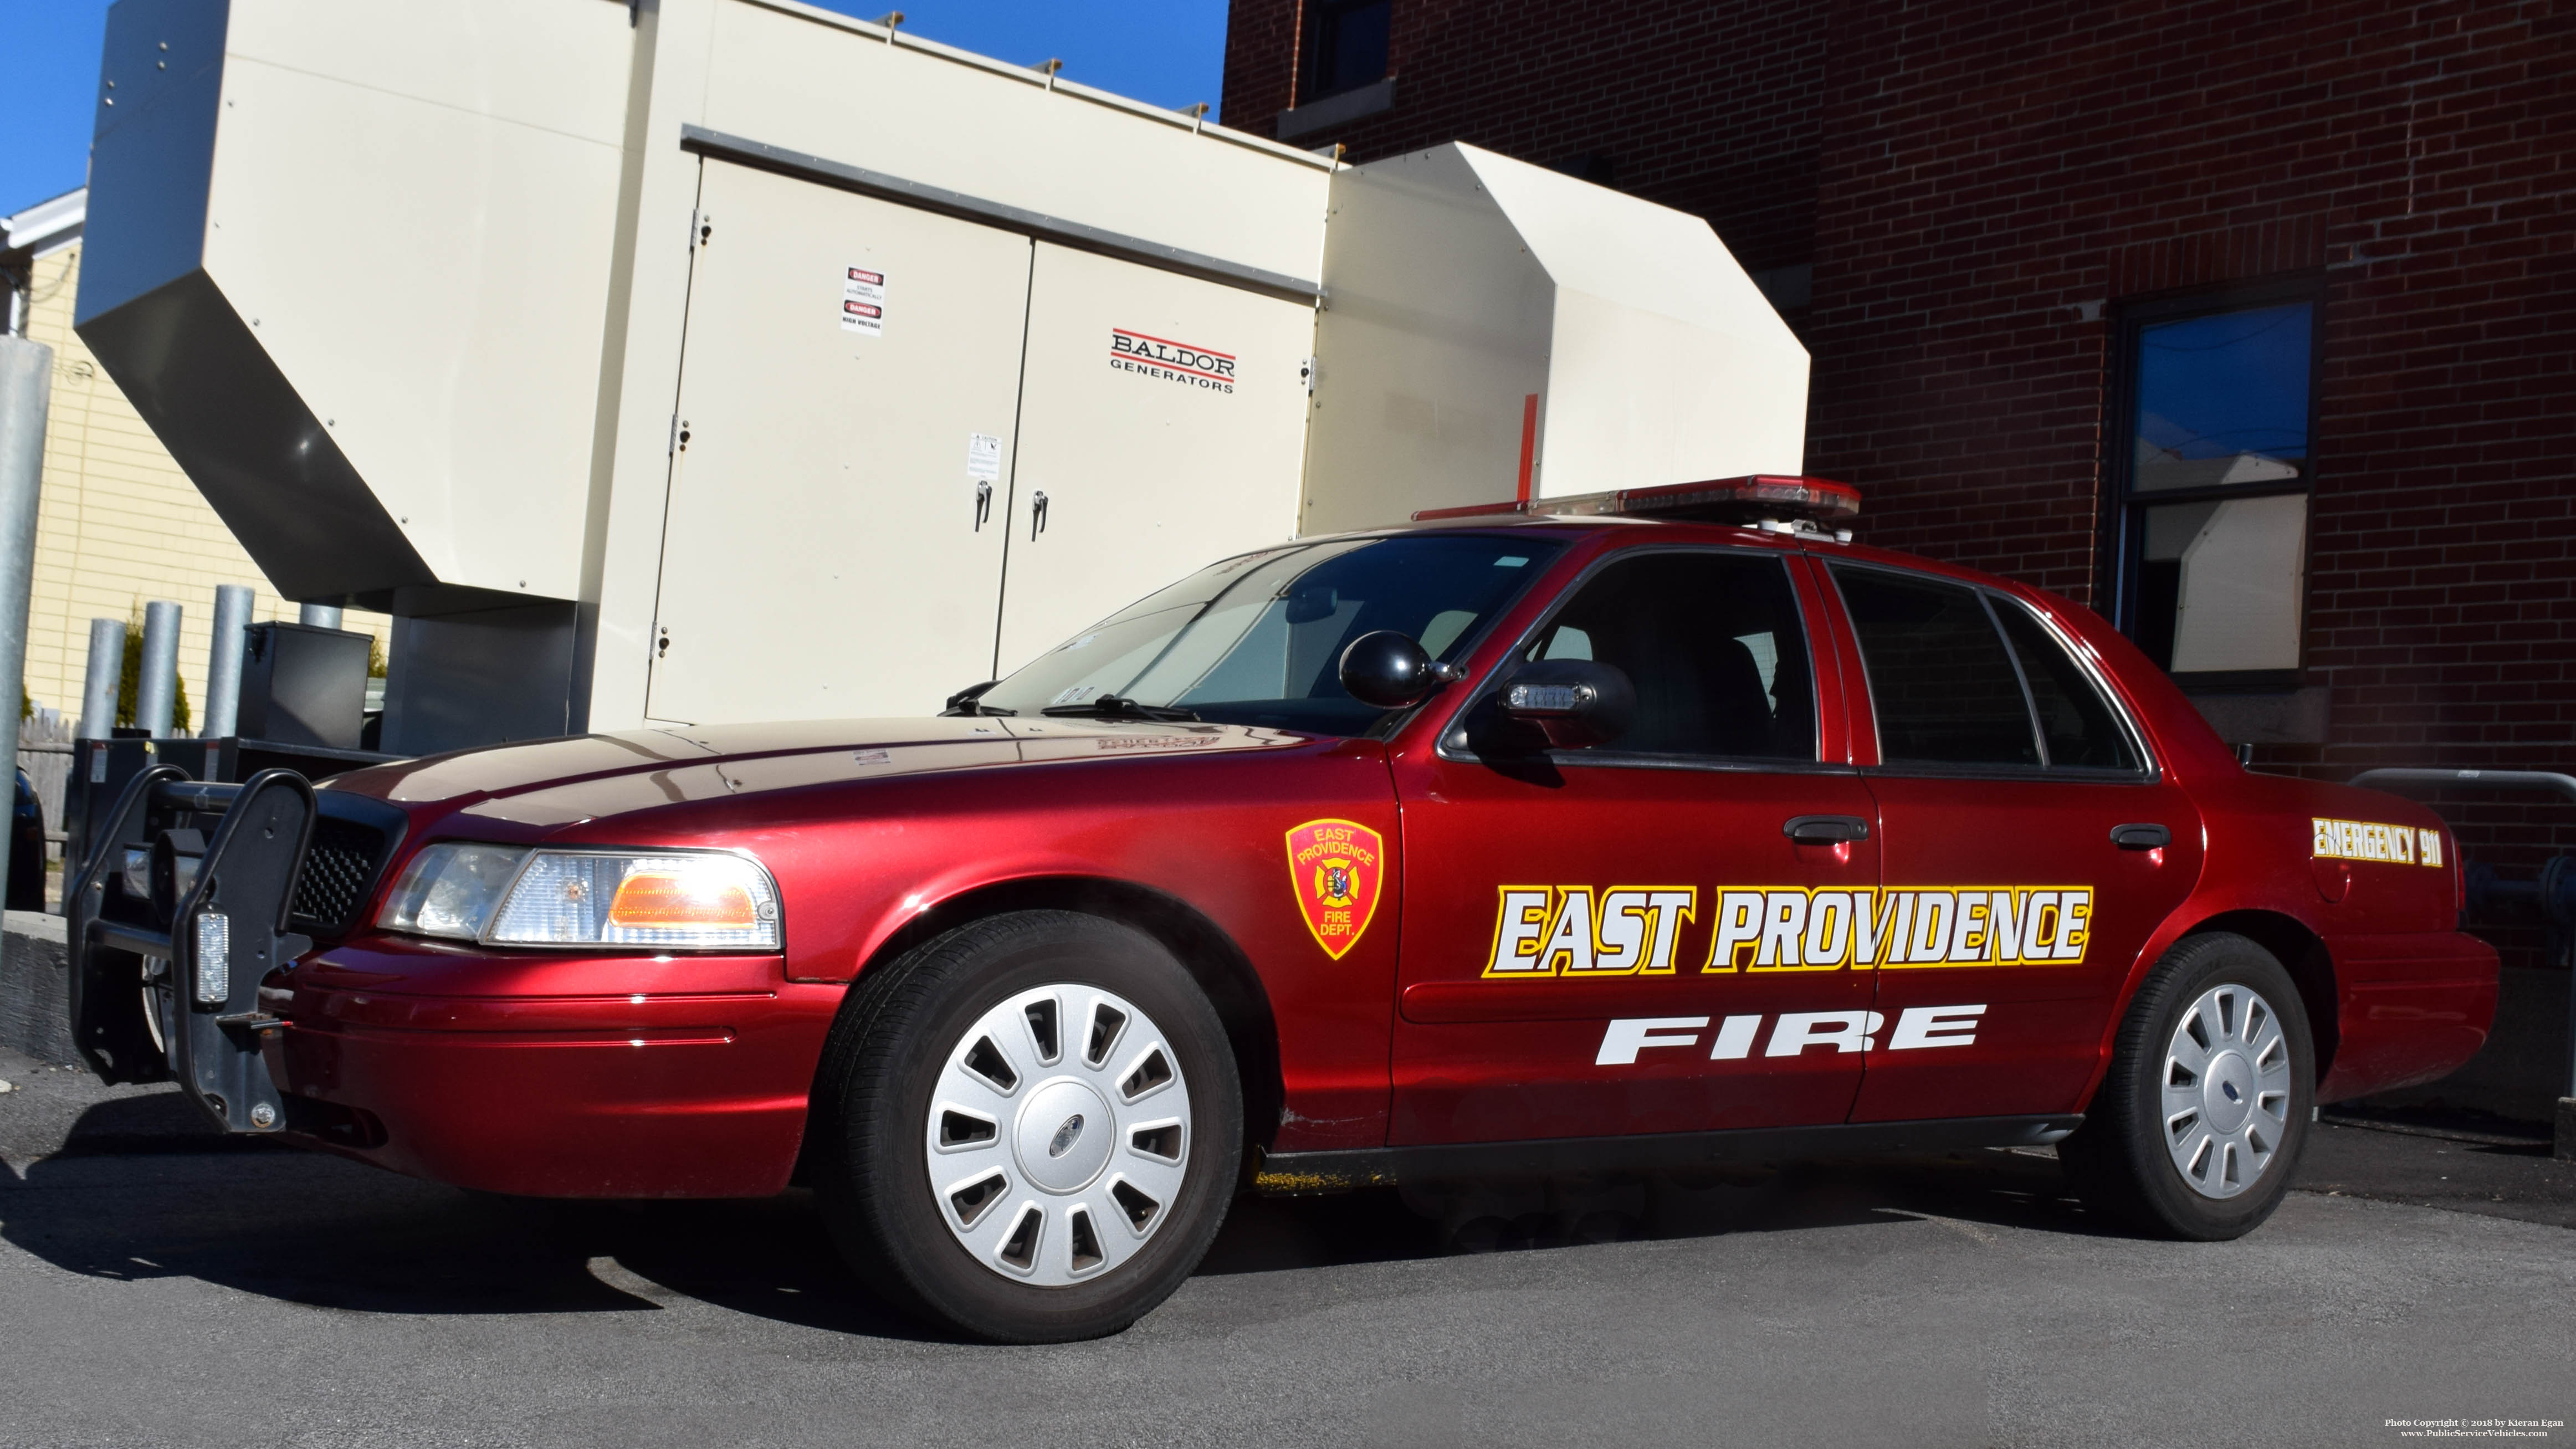 A photo  of East Providence Fire
            Battalion Chief 2, a 2008 Ford Crown Victoria Police Interceptor             taken by Kieran Egan